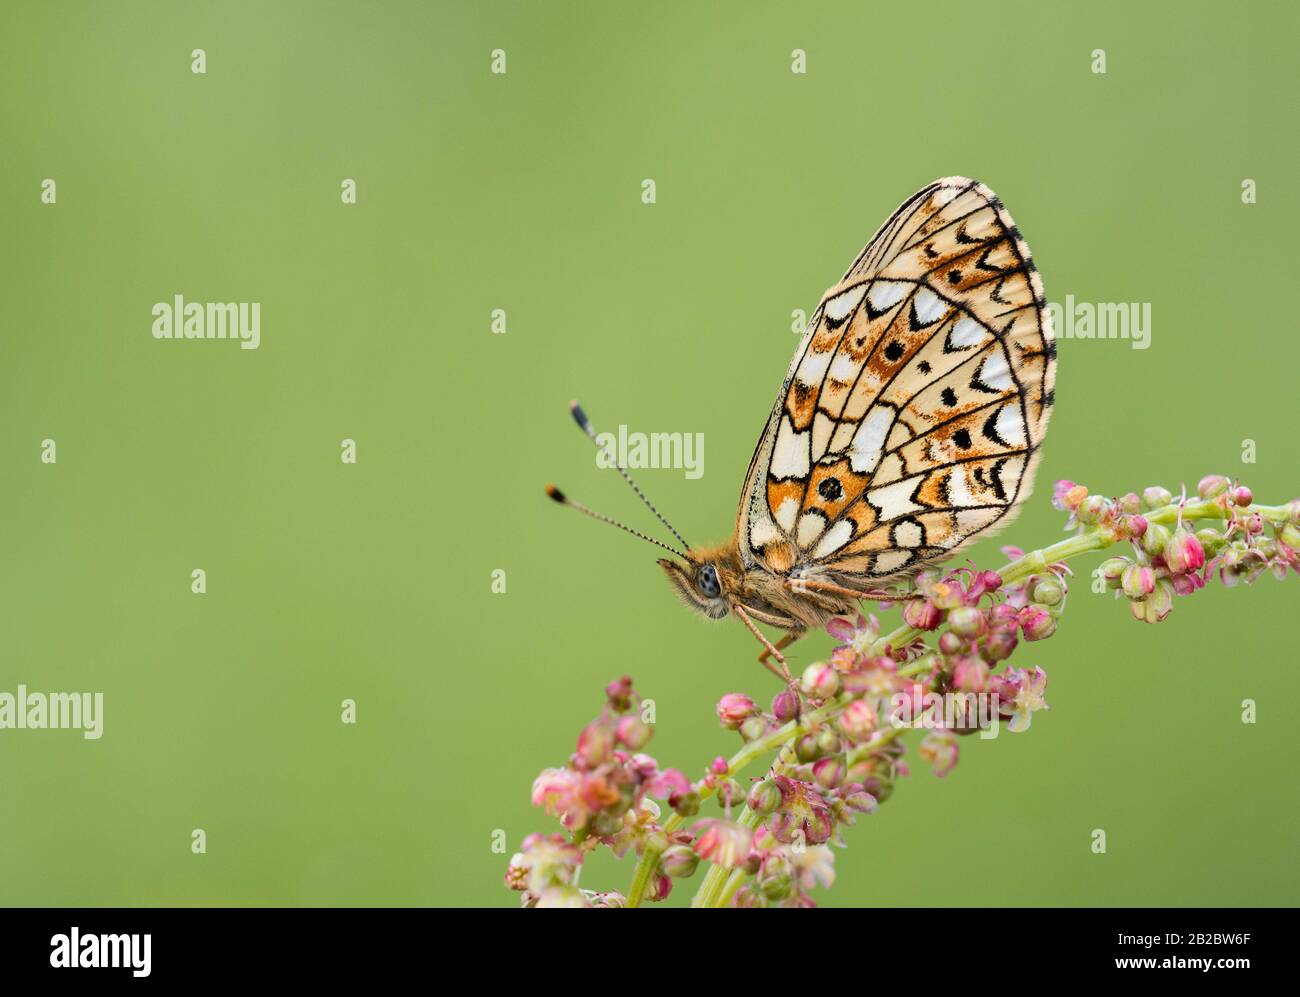 A Small Pearl-bordered Fritillary butterfly roosting on a plant, with its wings closed. Taken at Priddy Mineries in Somerset, England. Stock Photo